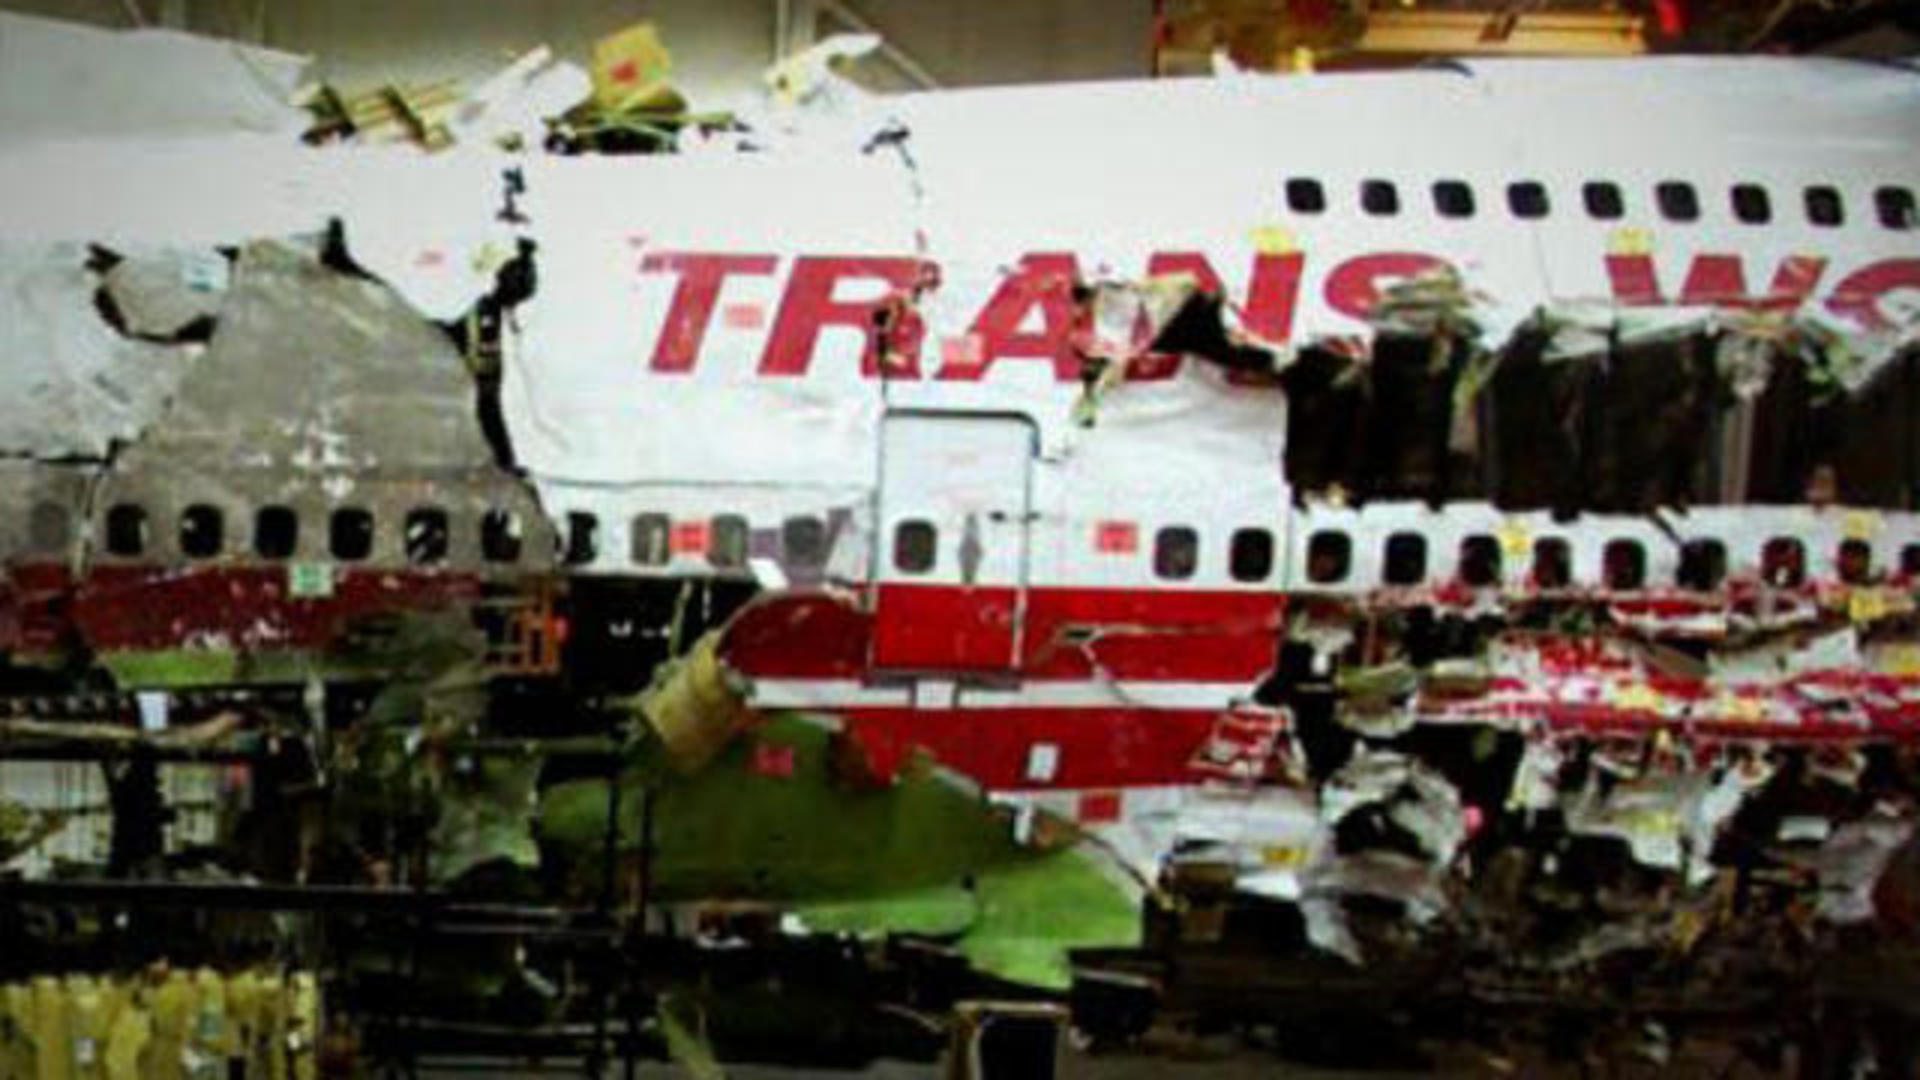 TWA Flight 800 gets another look 17 years later - CBS News